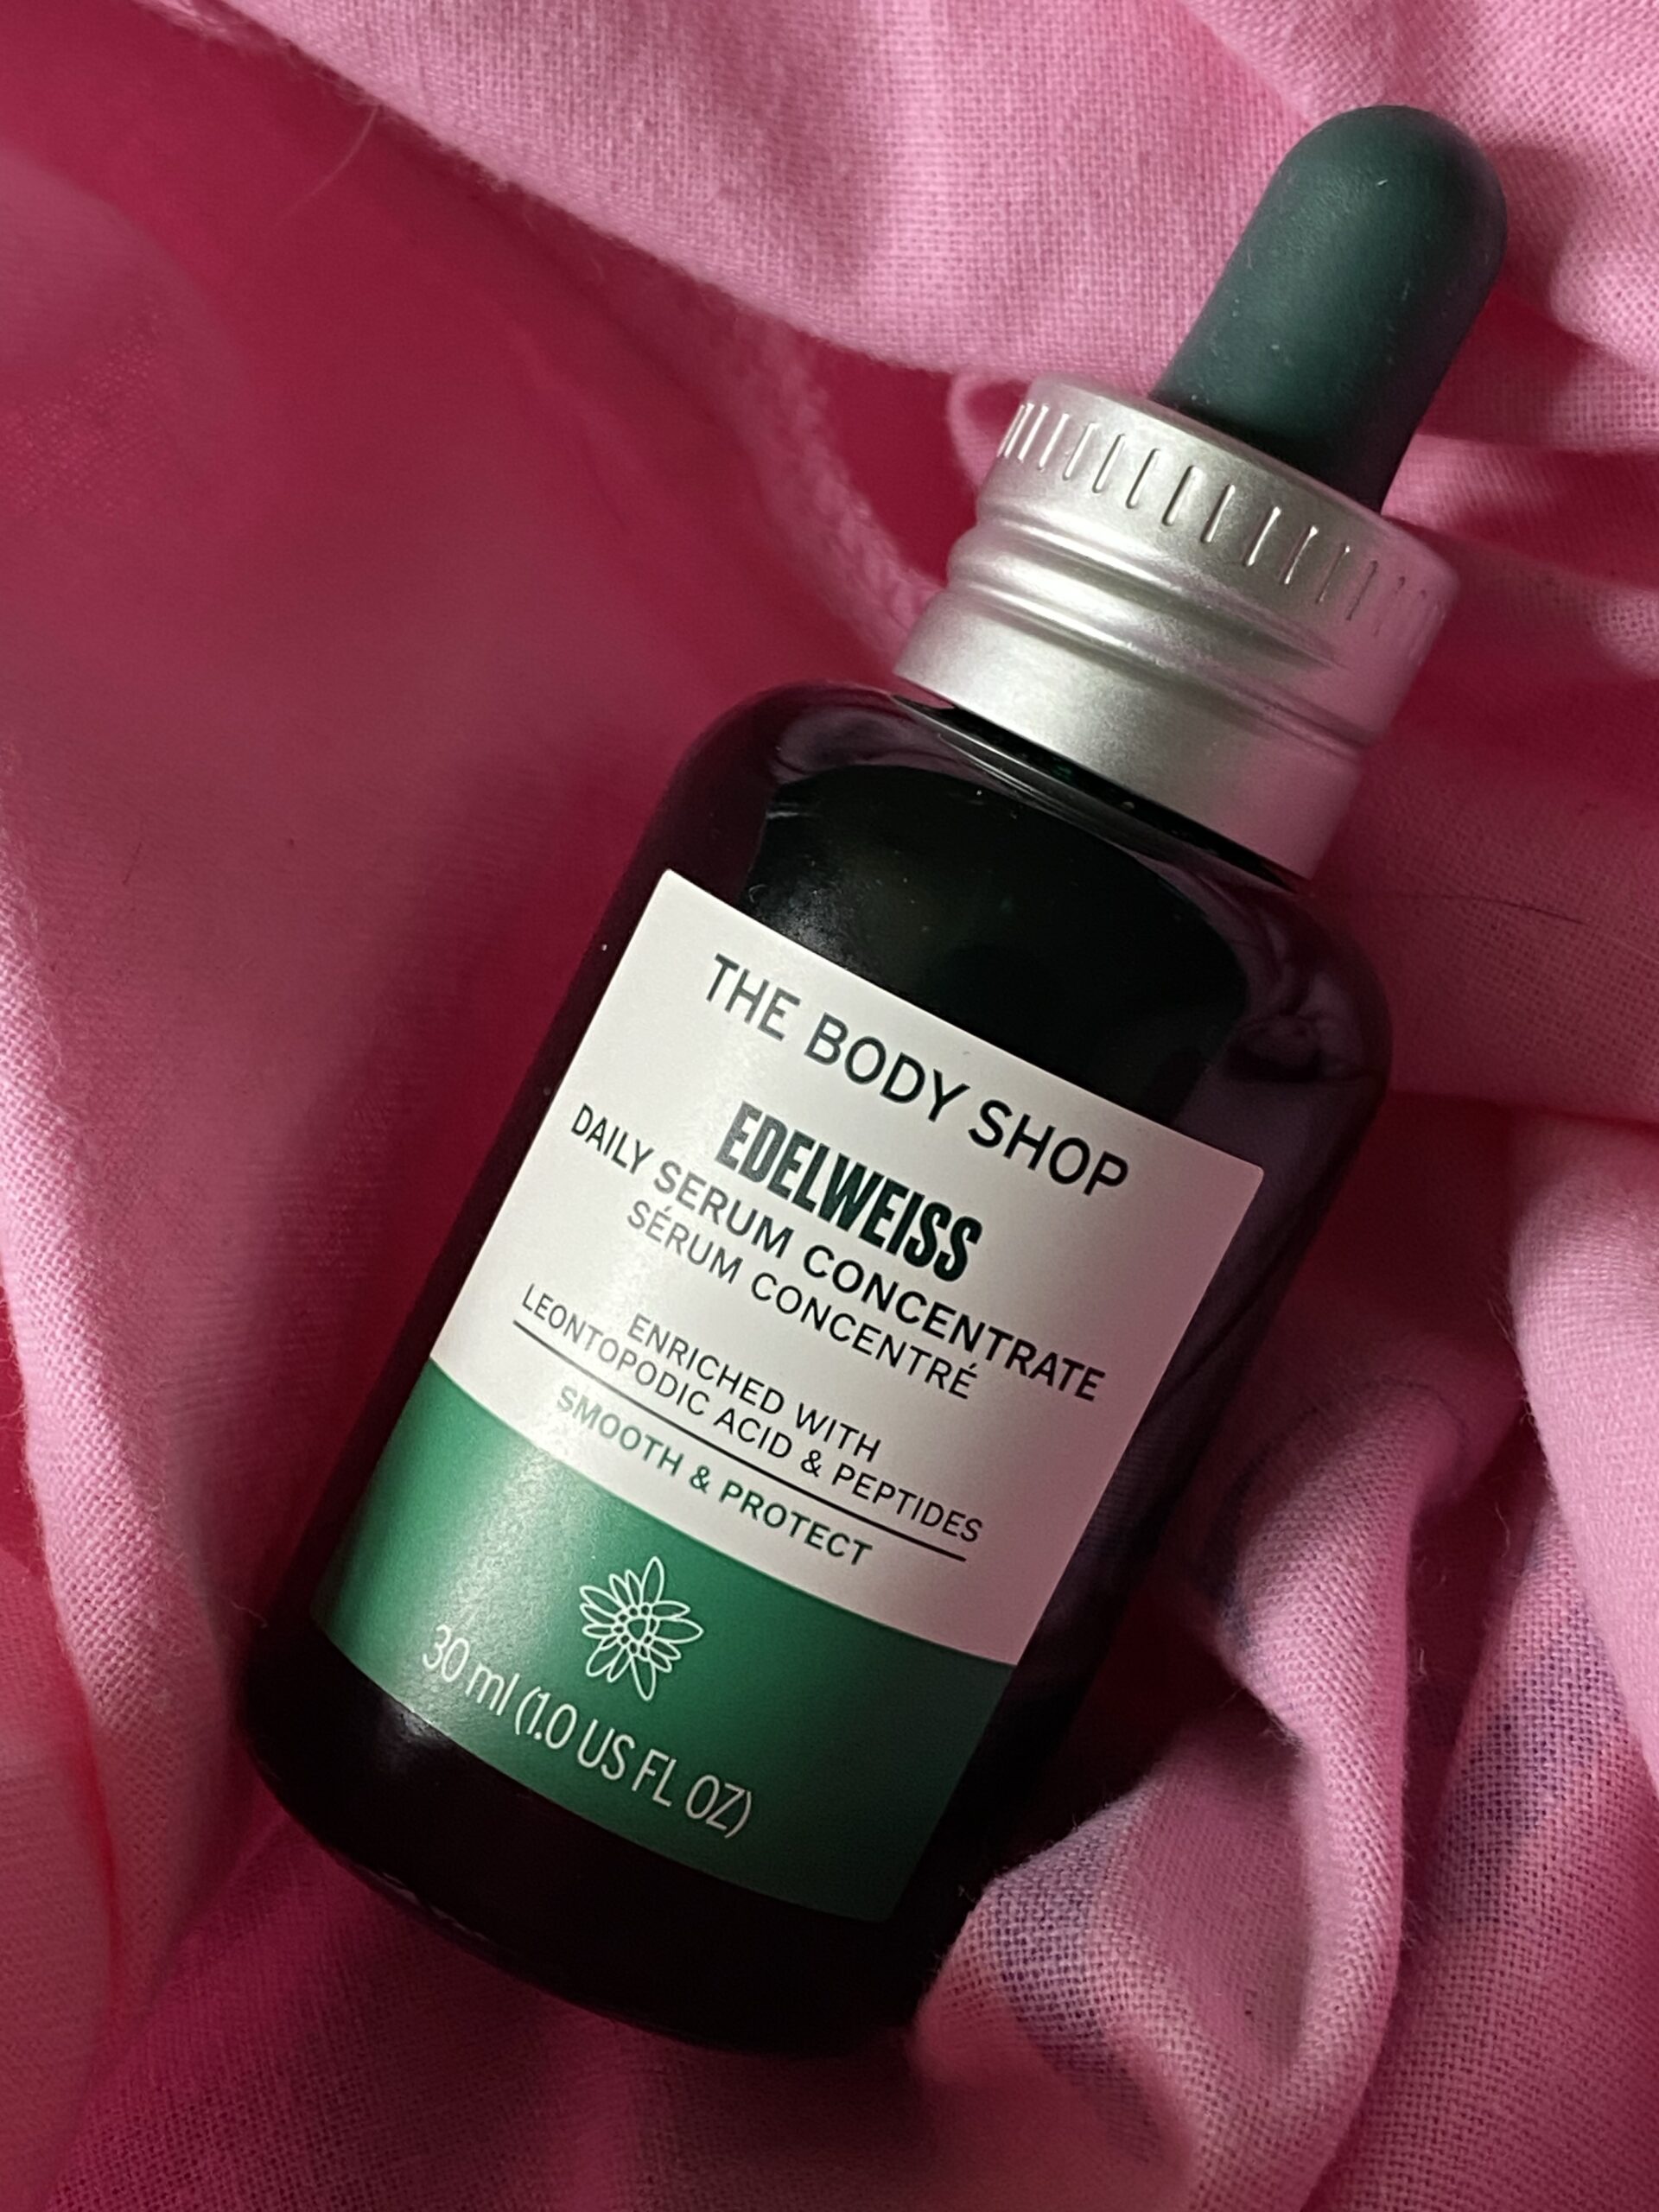 The Body Shop edelweiss daily serum concentrate